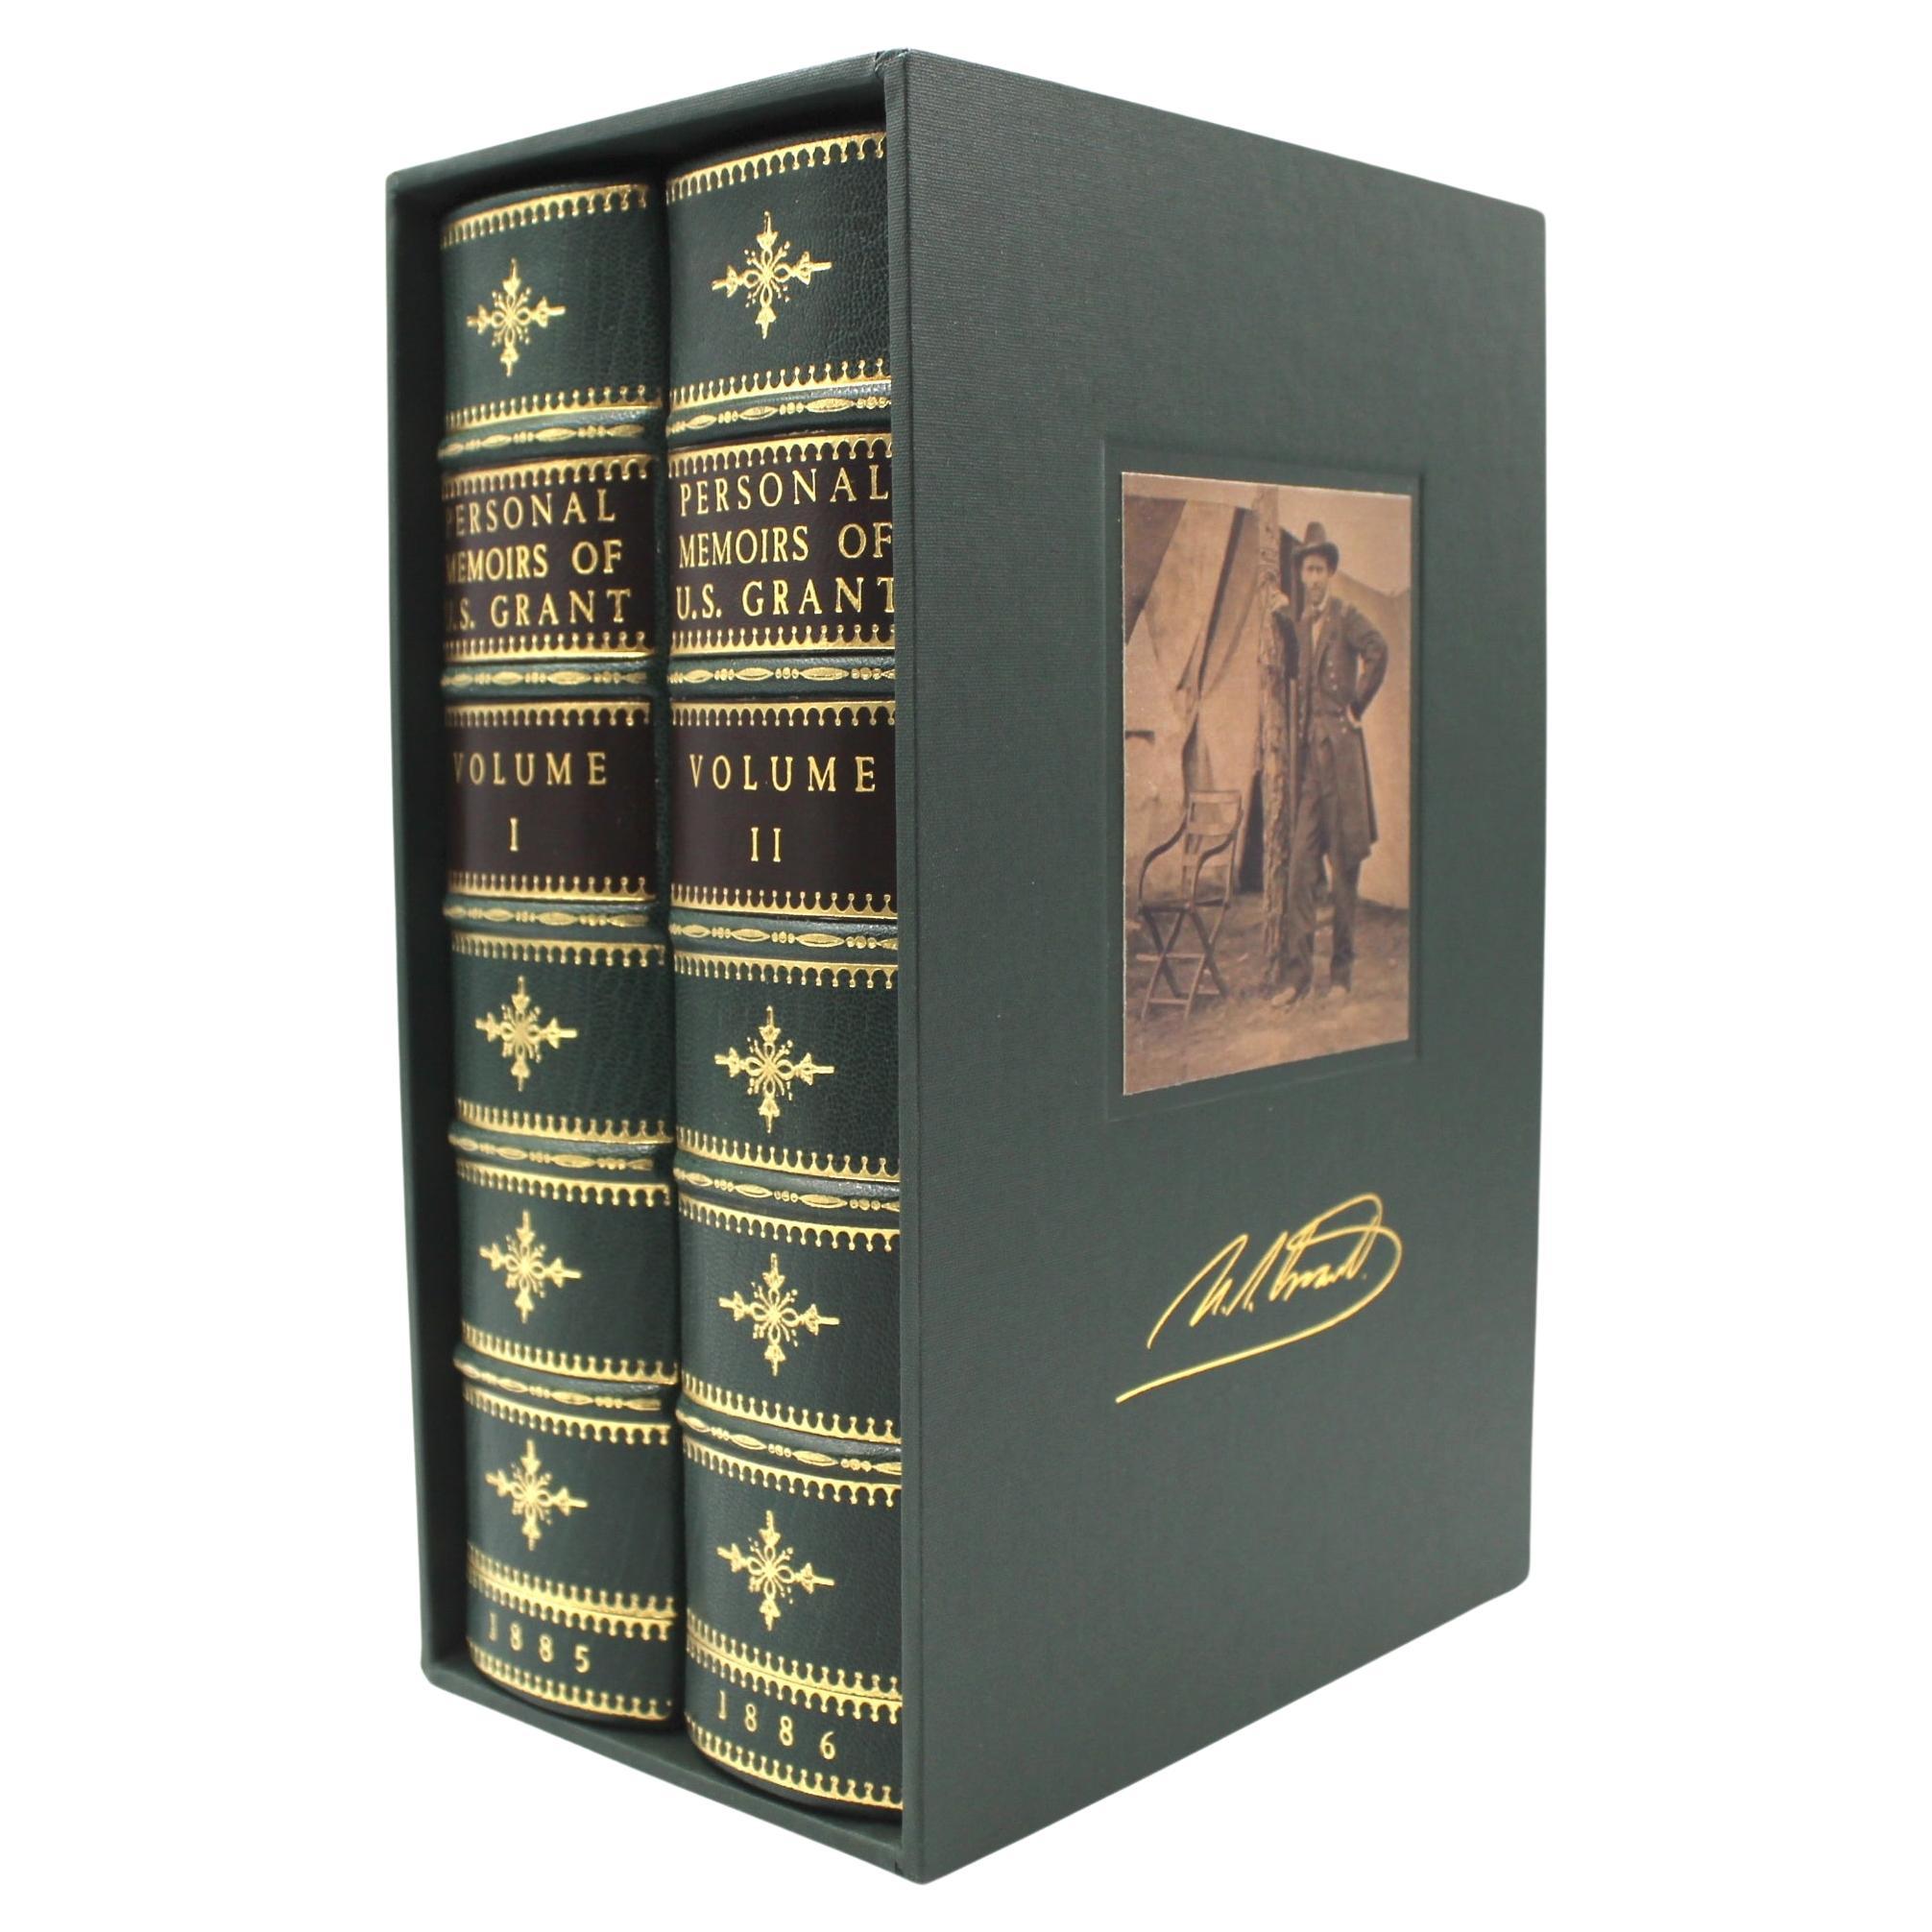 Personal Memoirs of U. S. Grant, Two-Volume Set, 1885-86 For Sale